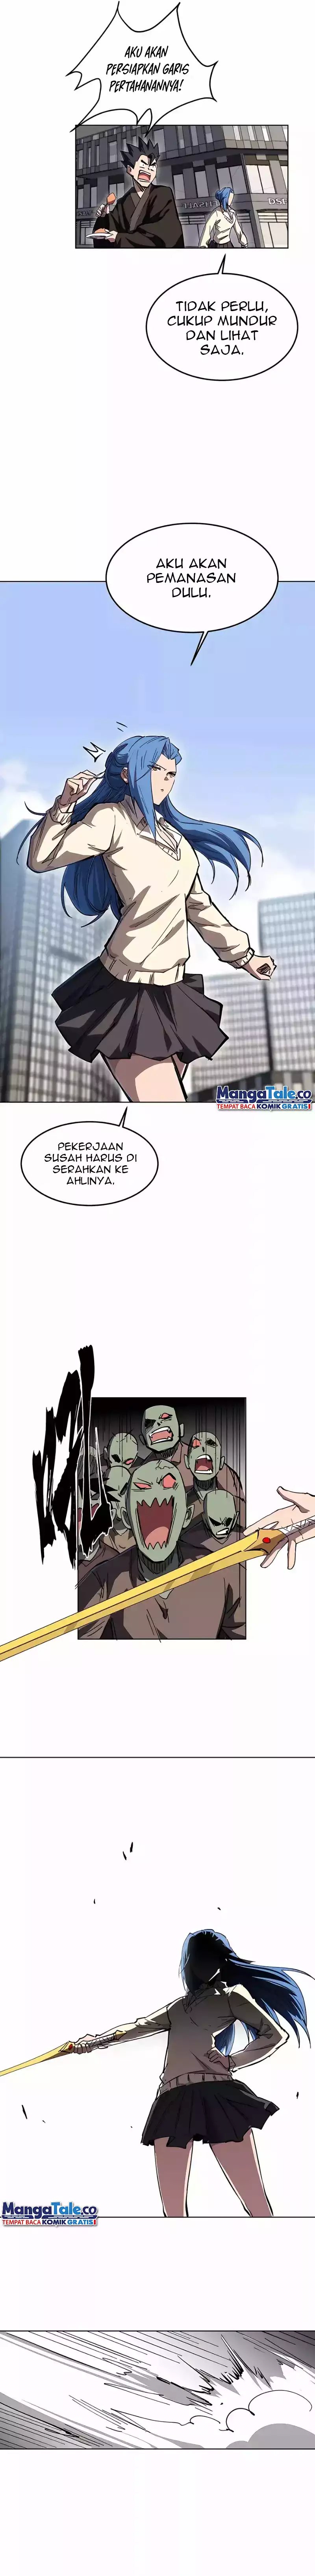 Mr. Zombie Chapter 24 Image 1